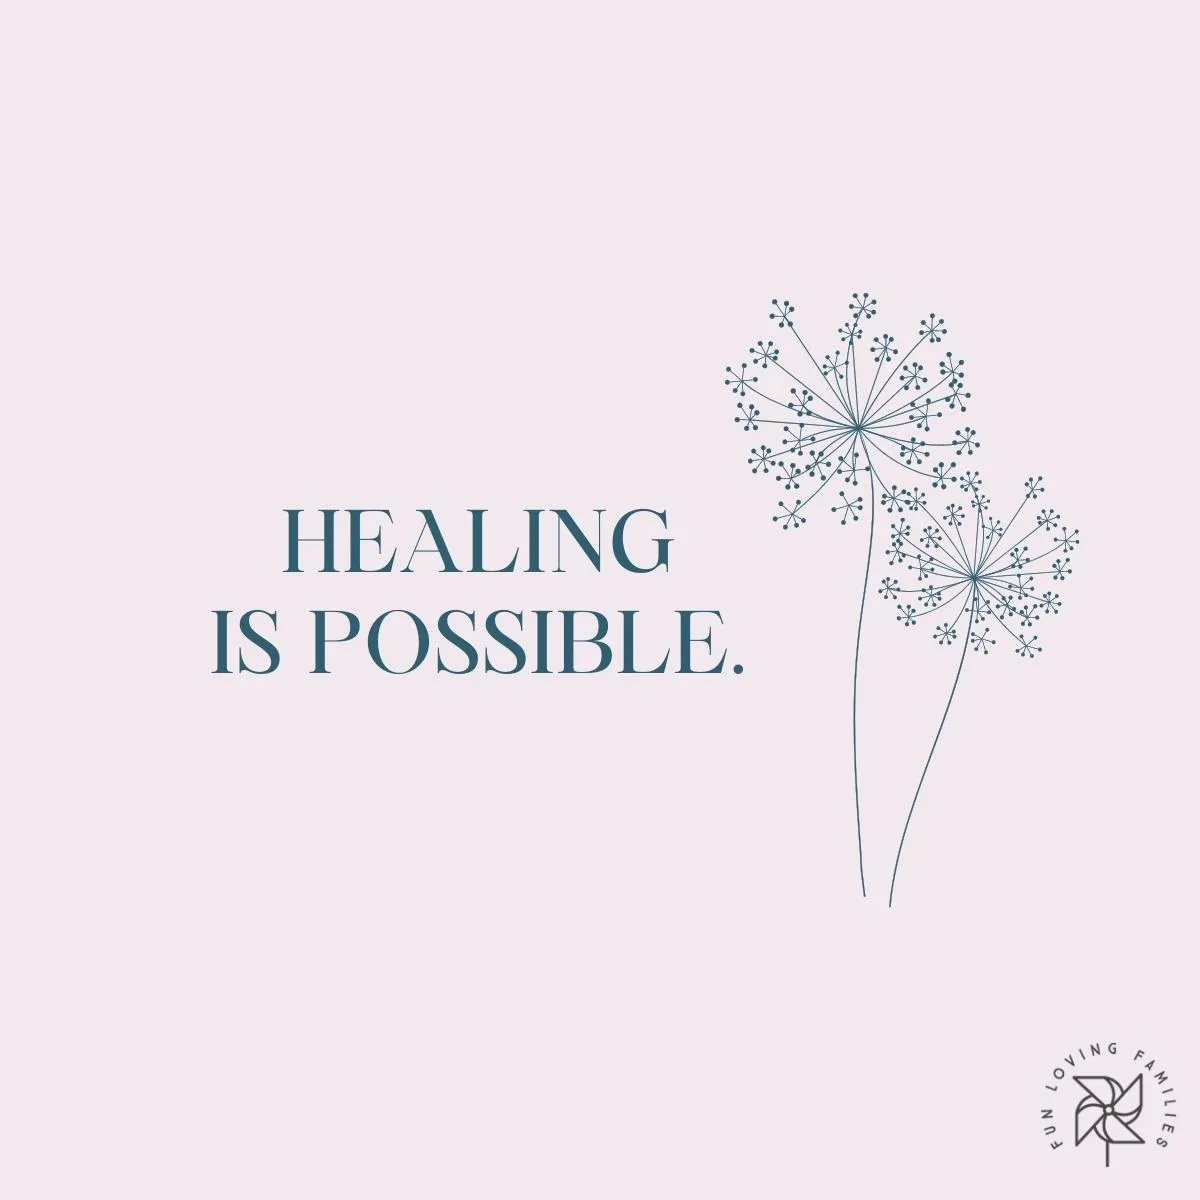 Healing is possible affirmation